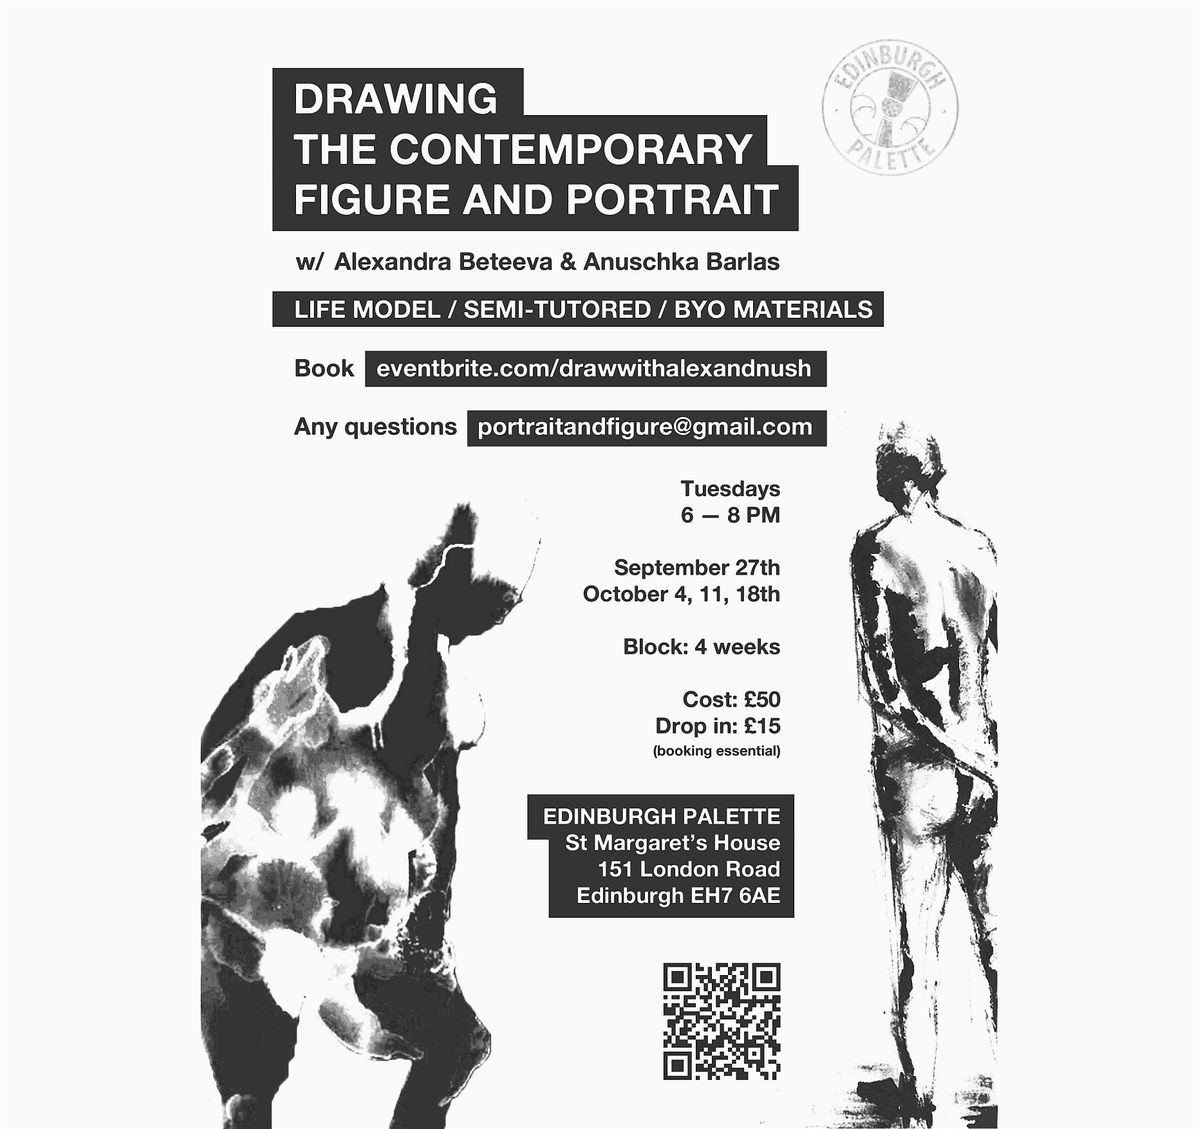 Drawing the Contemporary Figure and Portrait (Edinburgh)